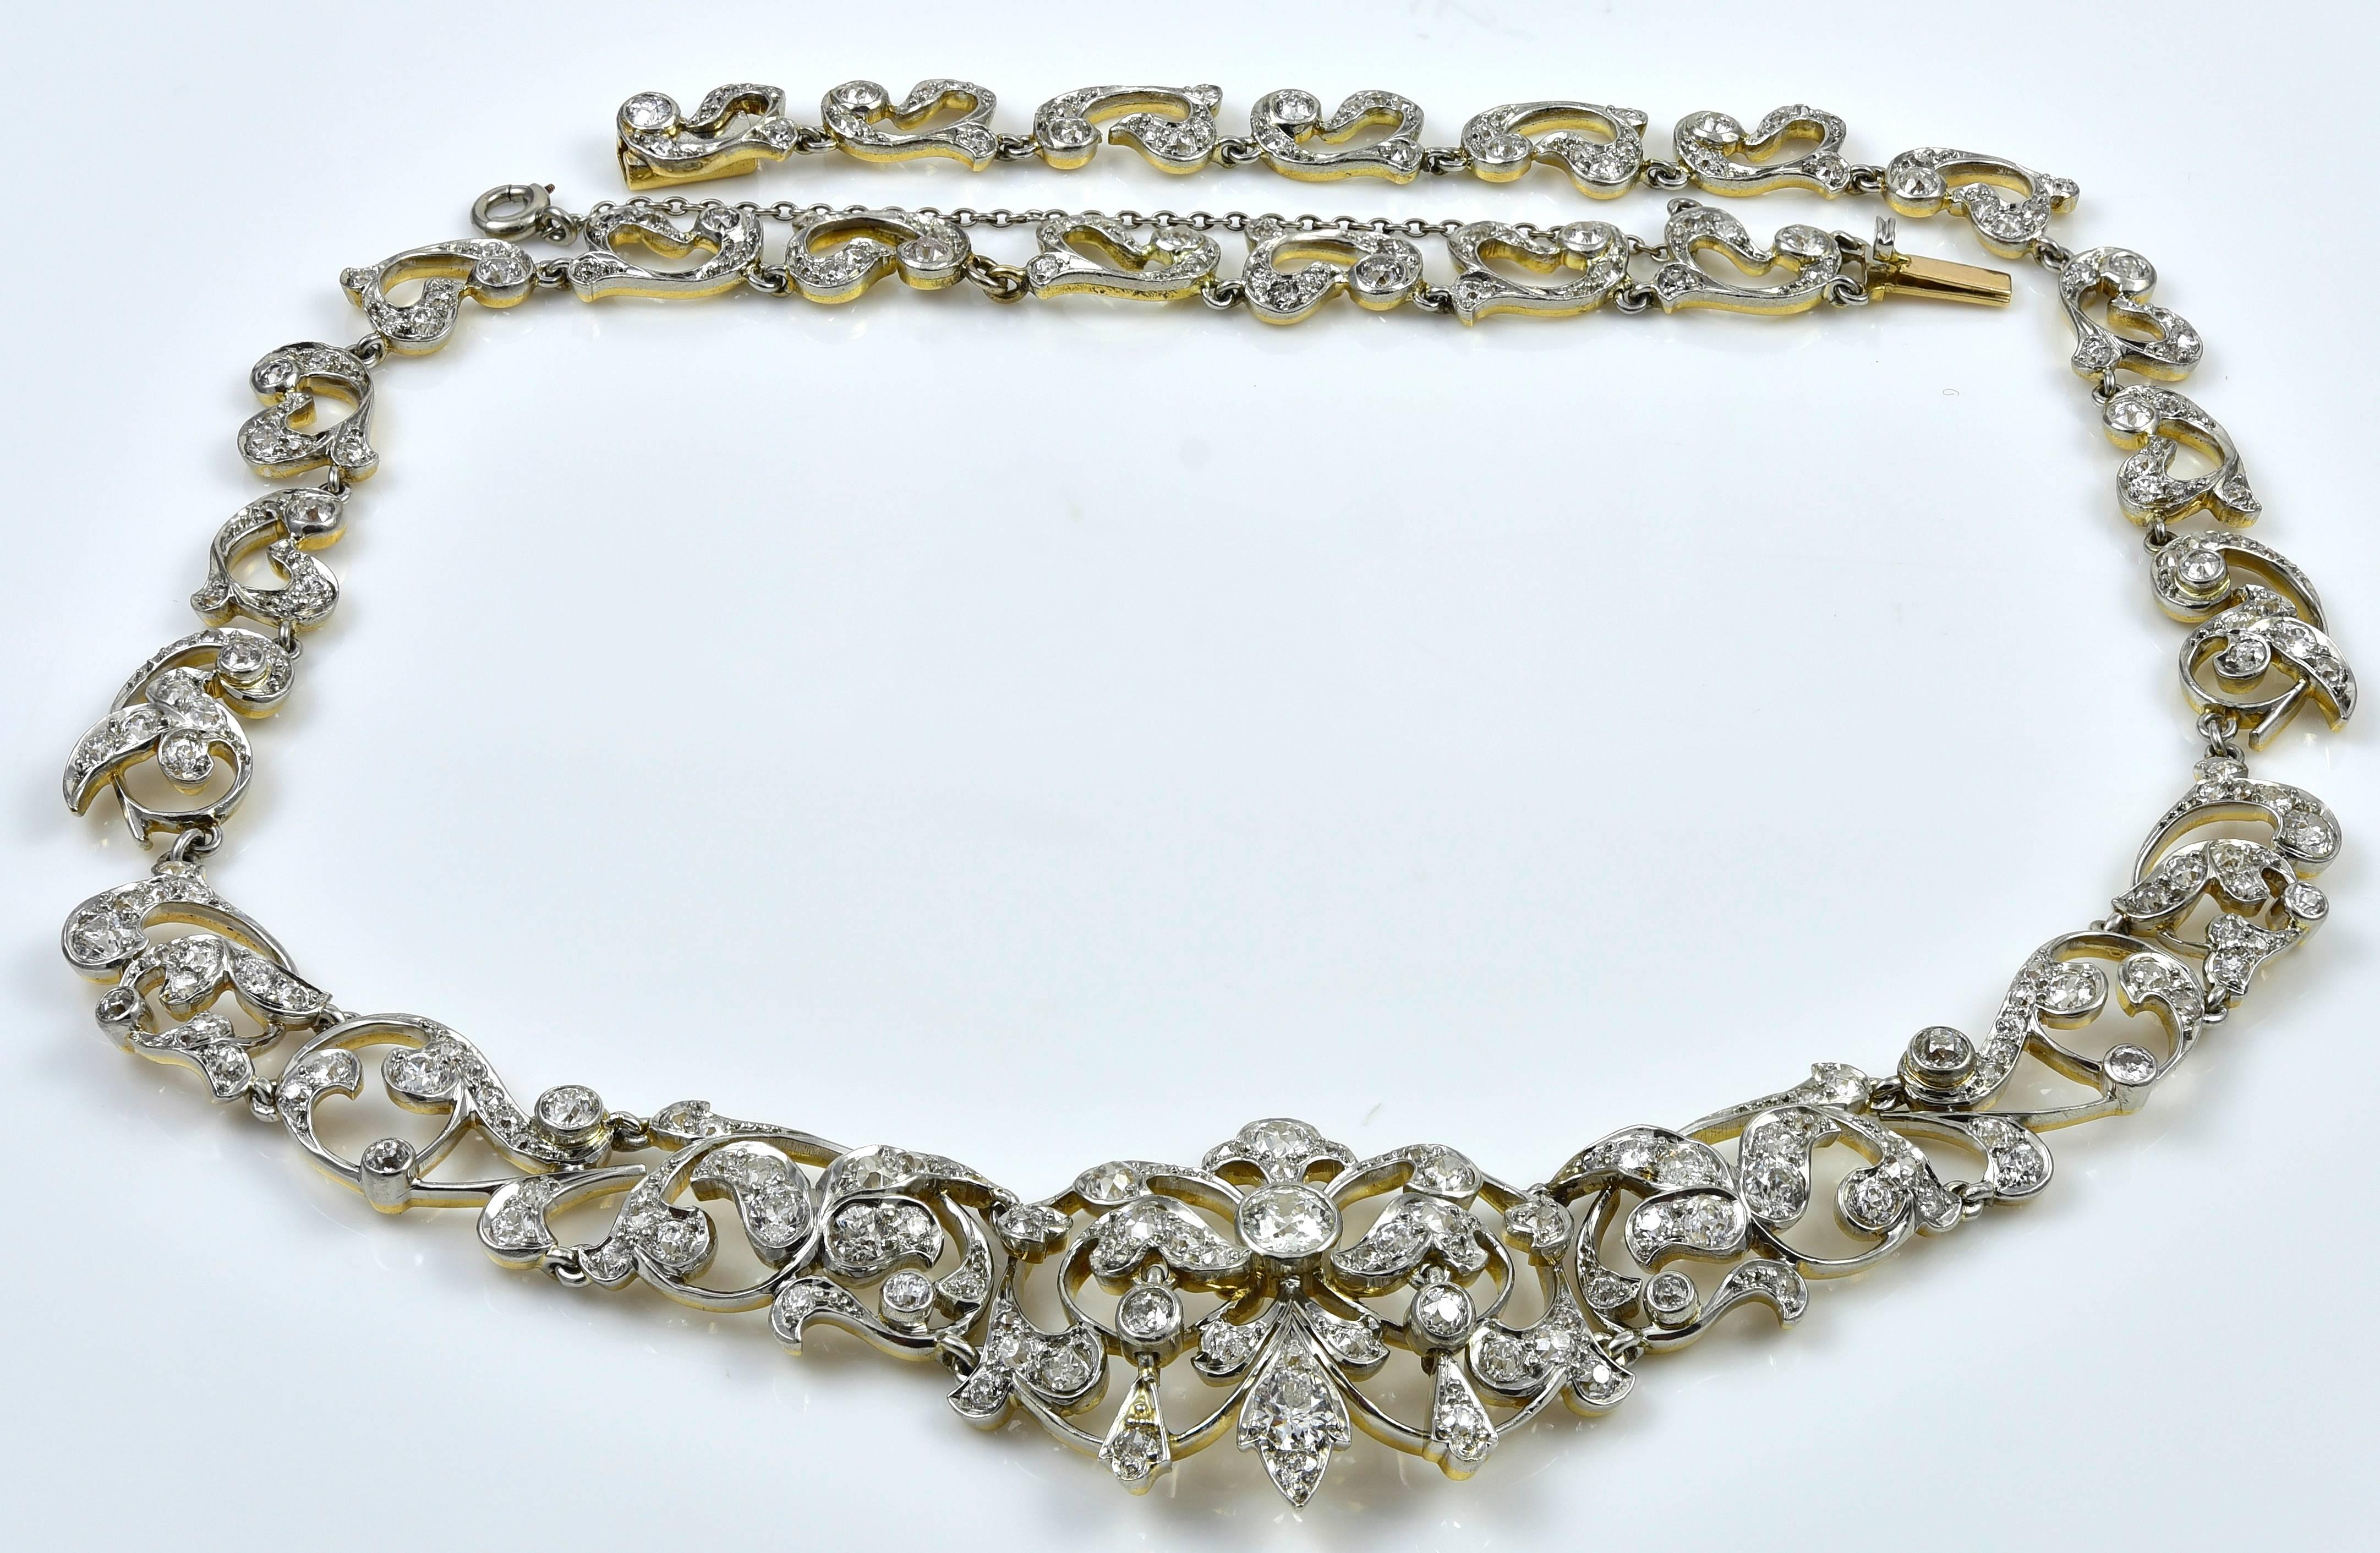 Luminous Edwardian diamond necklace.  Platinum and 14K yellow gold.  All around open work rosette and leaf pattern.  Approximately 7.50 carats of beautiful old mine cut diamonds, G-H color.  Mixed prong and bezel set.  15.